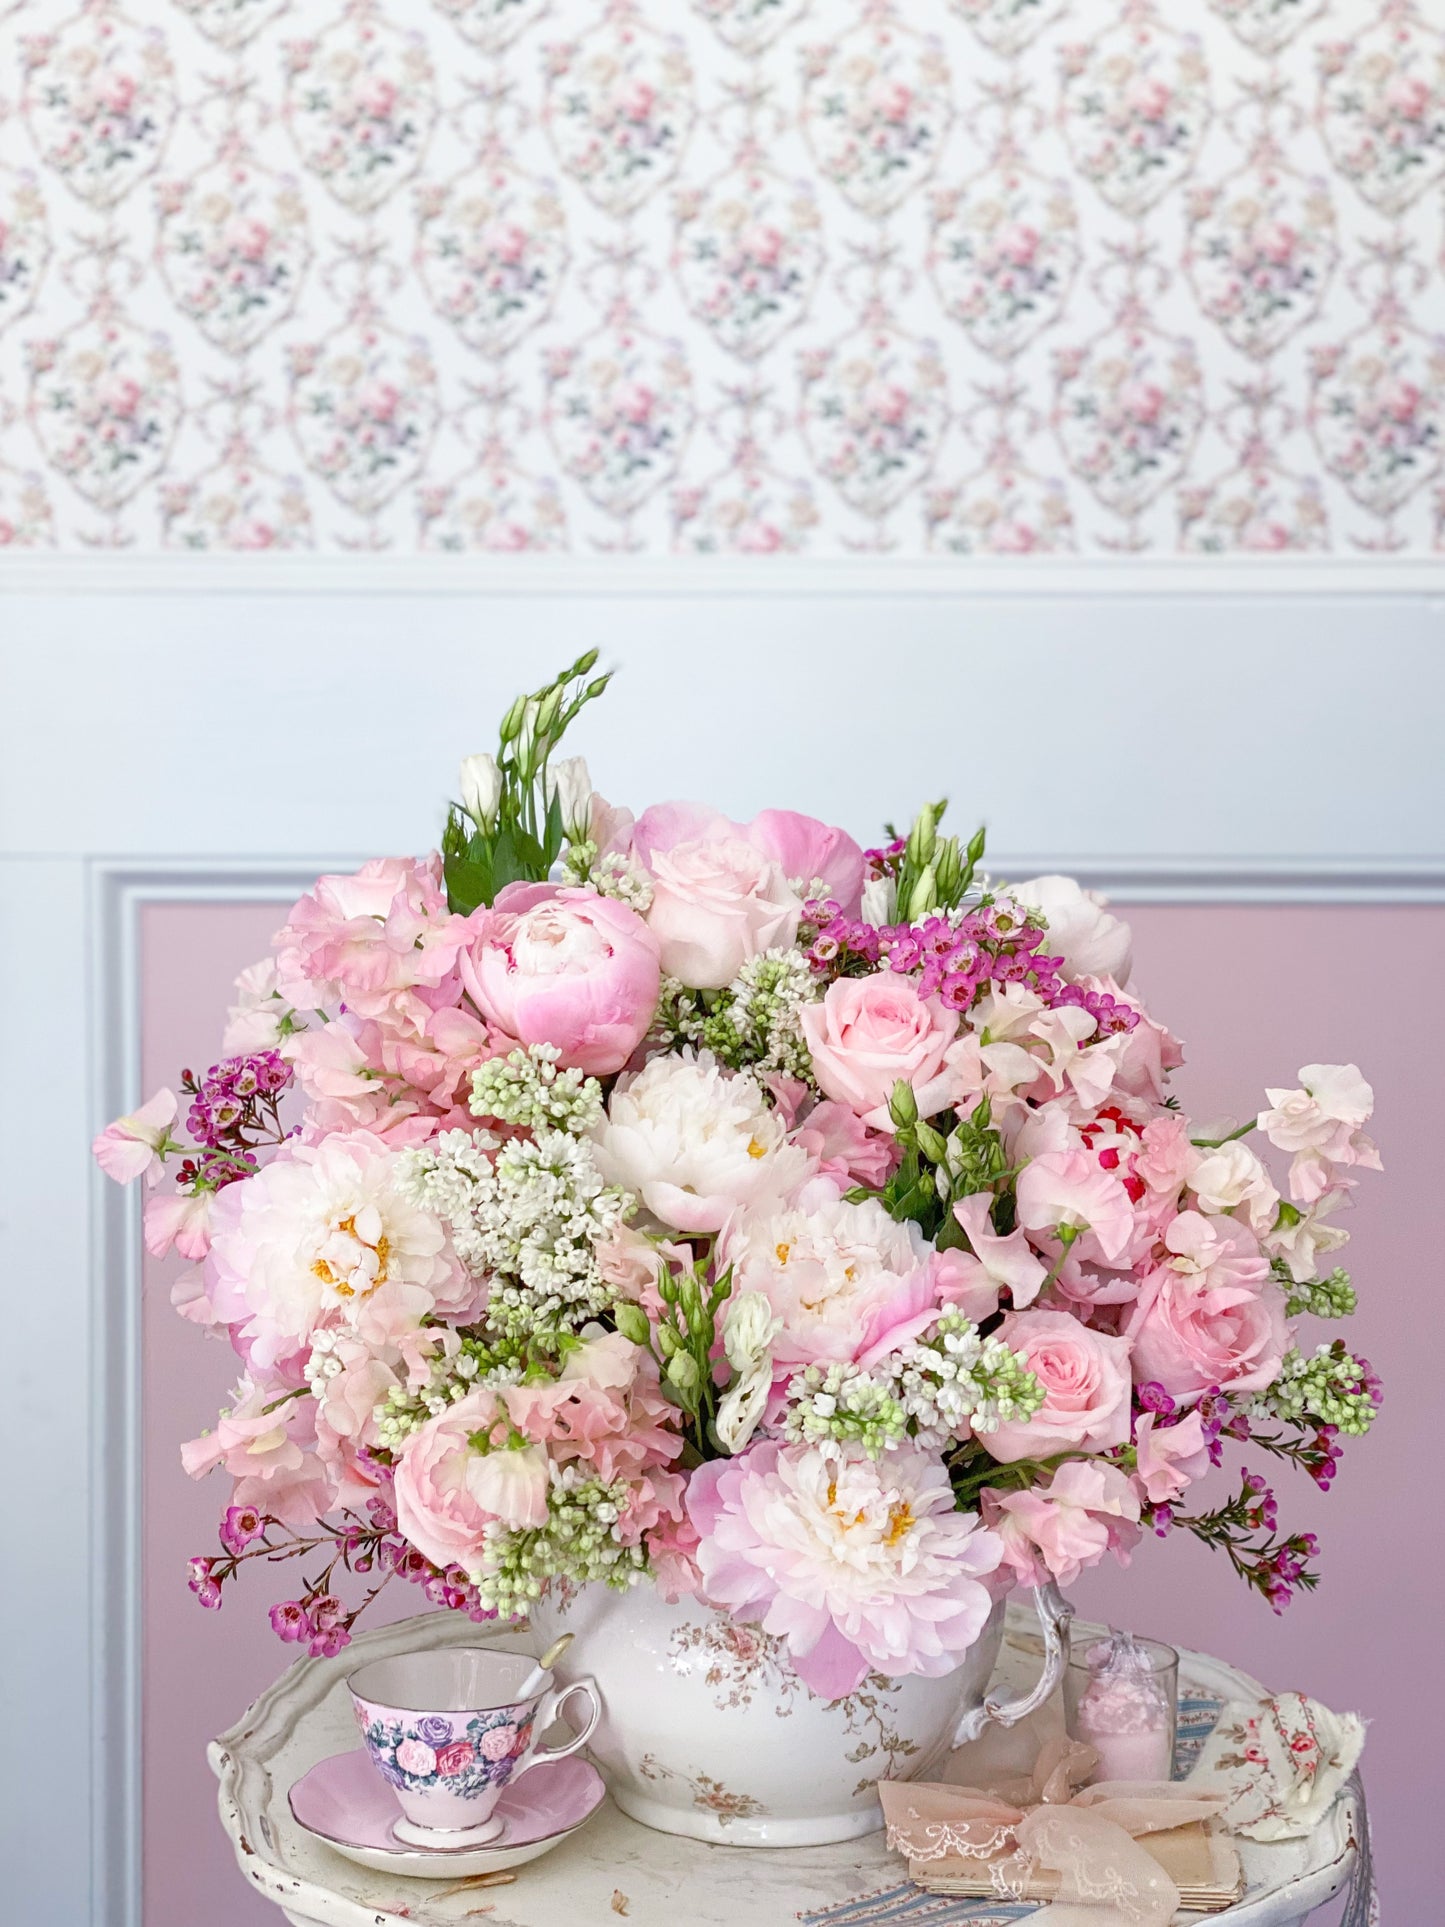 Large Pink Floral Arrangement Gallery Wrapped Canvas